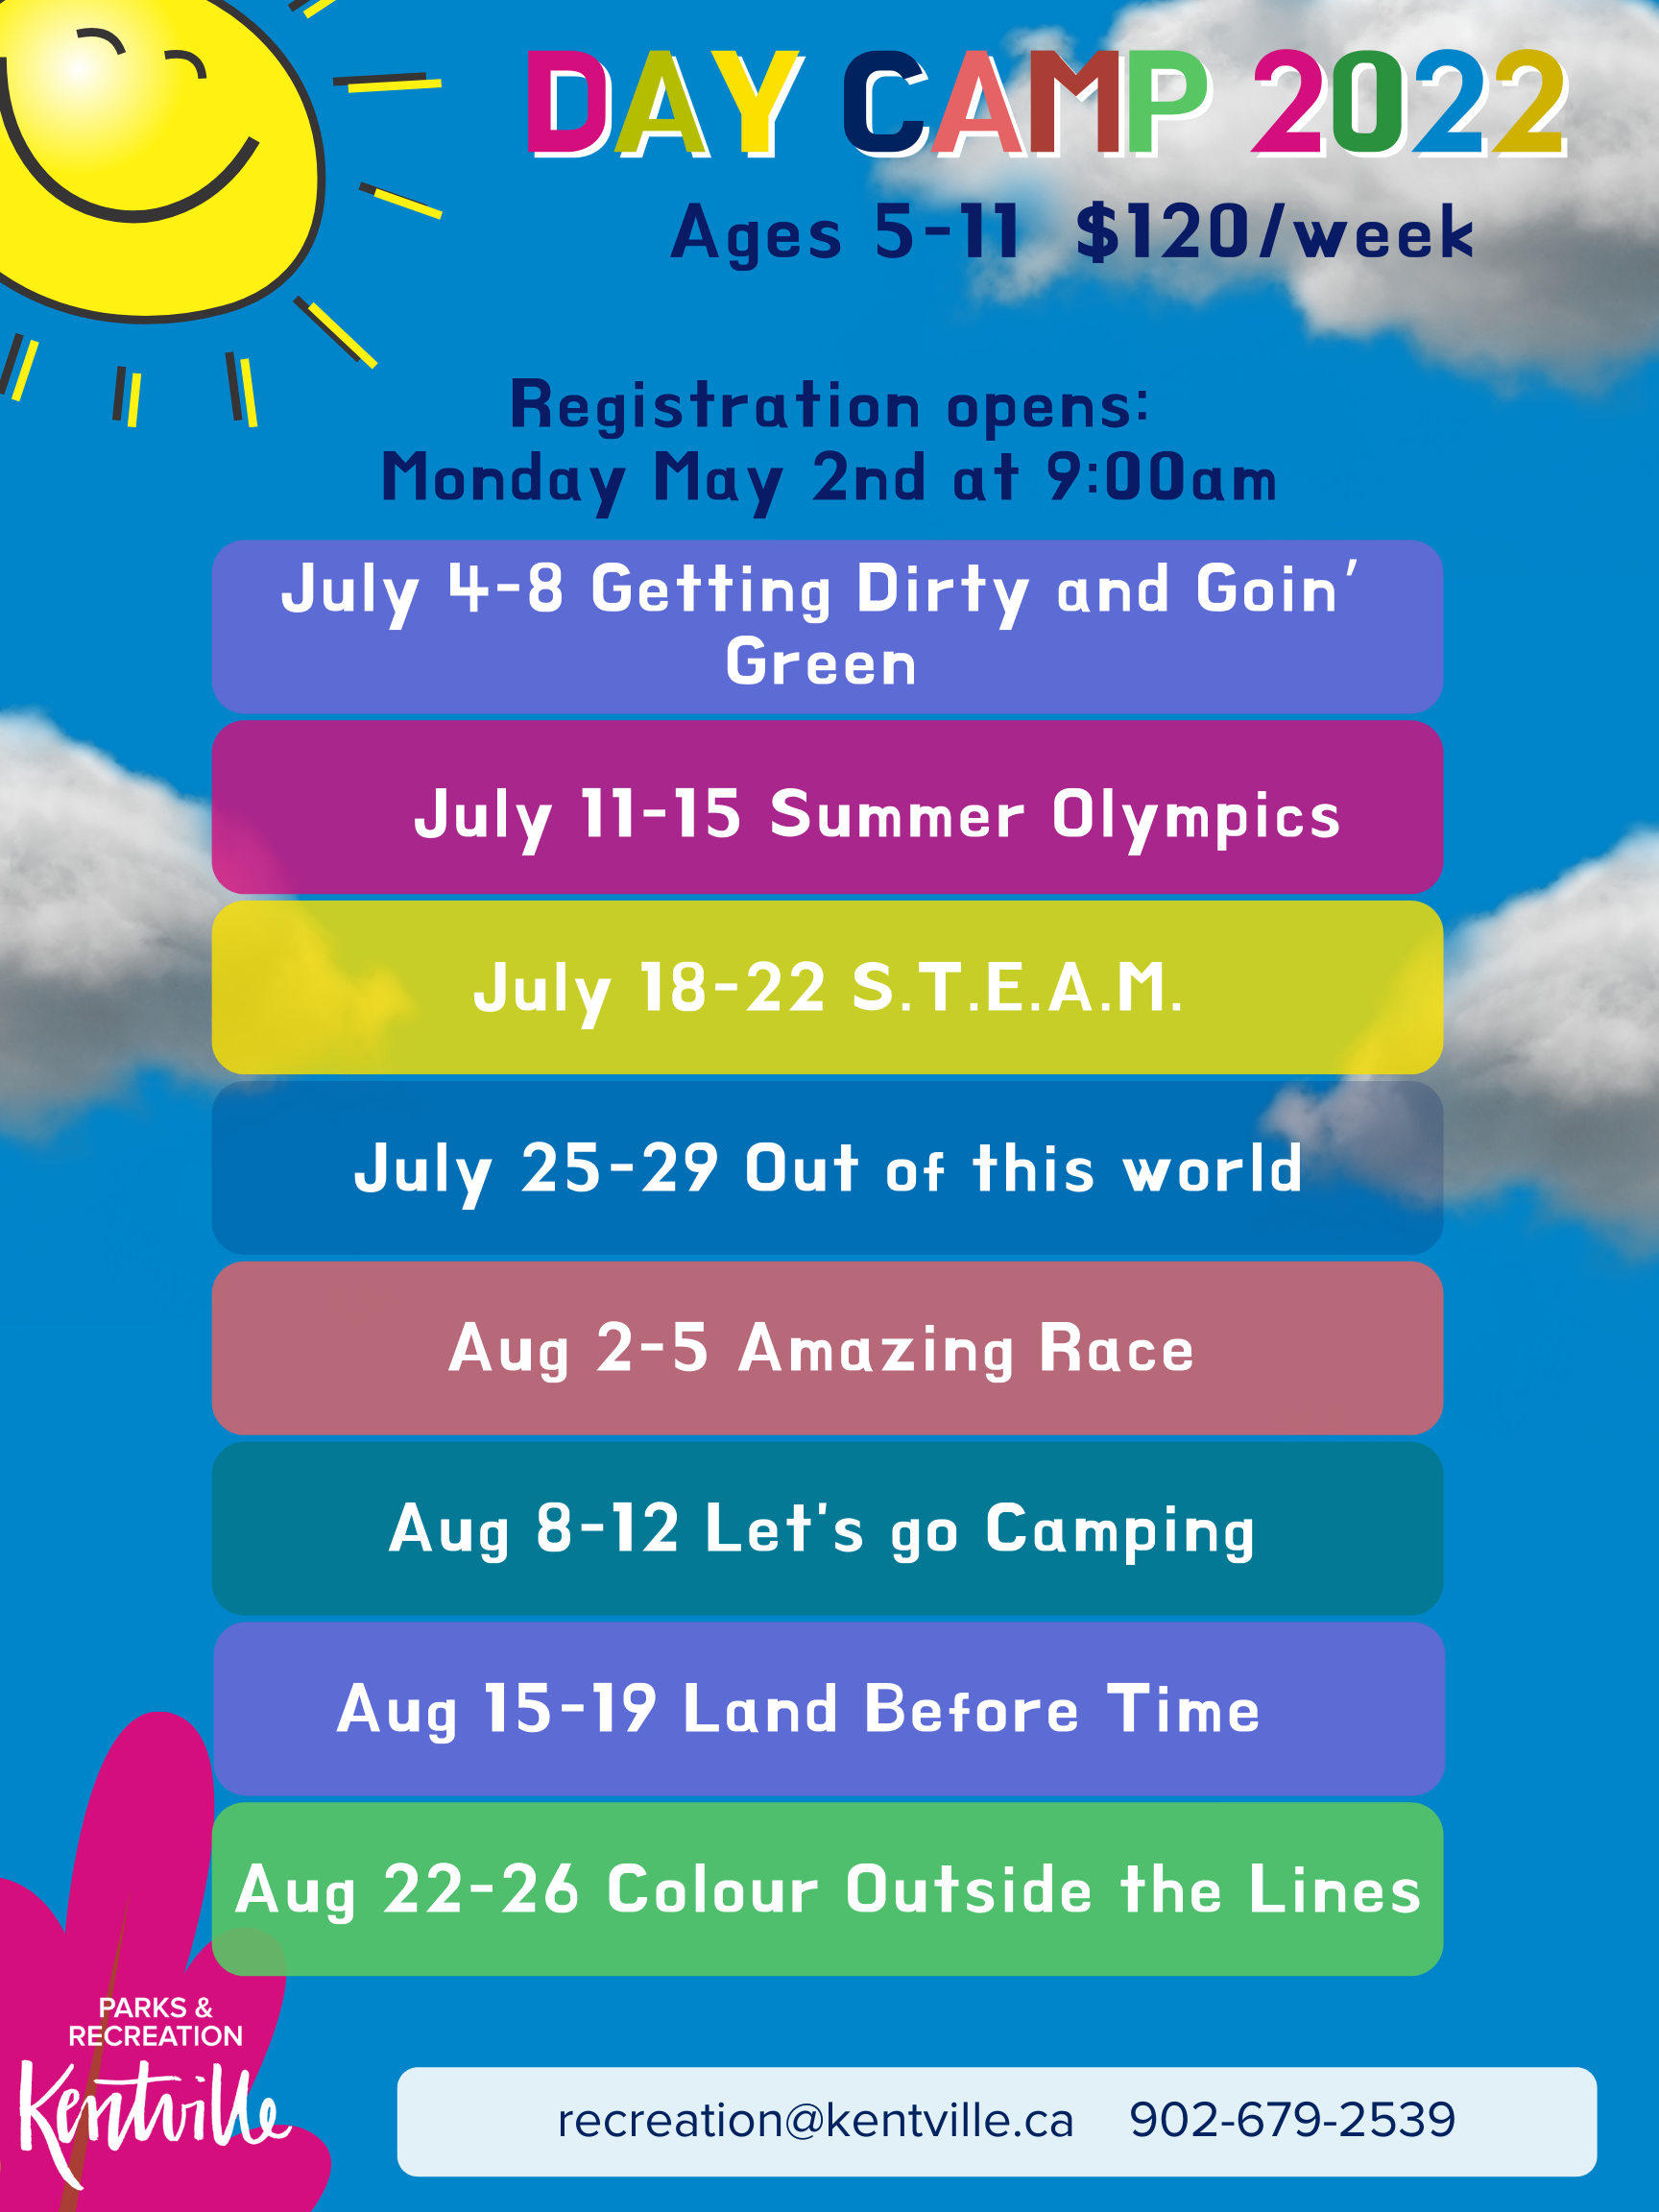 Day camp 2022 poster with information on the 8 day camp themes for 2022. 